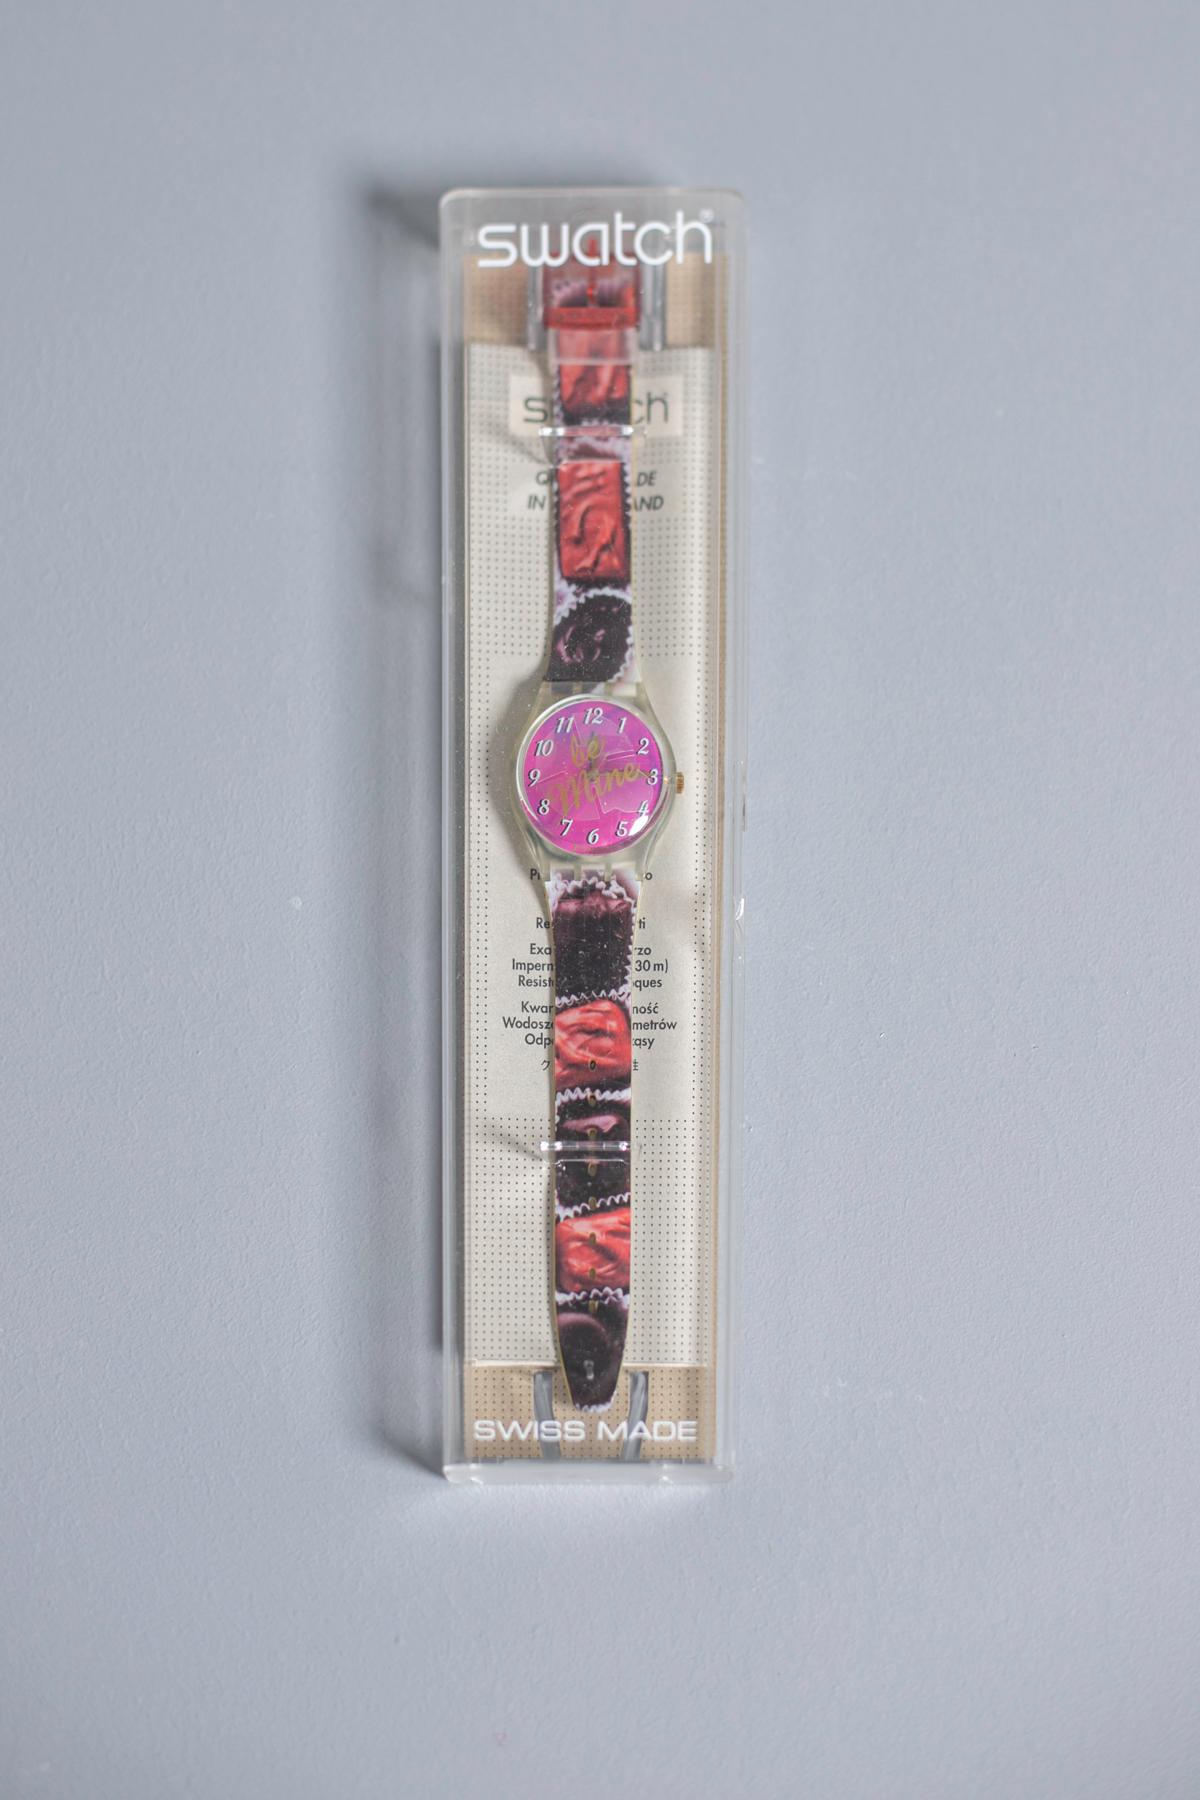 Historical collection Swatch Be Mine year 1999. This is the vintage Swatch collection. The watch has greedy chocolates on the strap, a pink dial and the words 